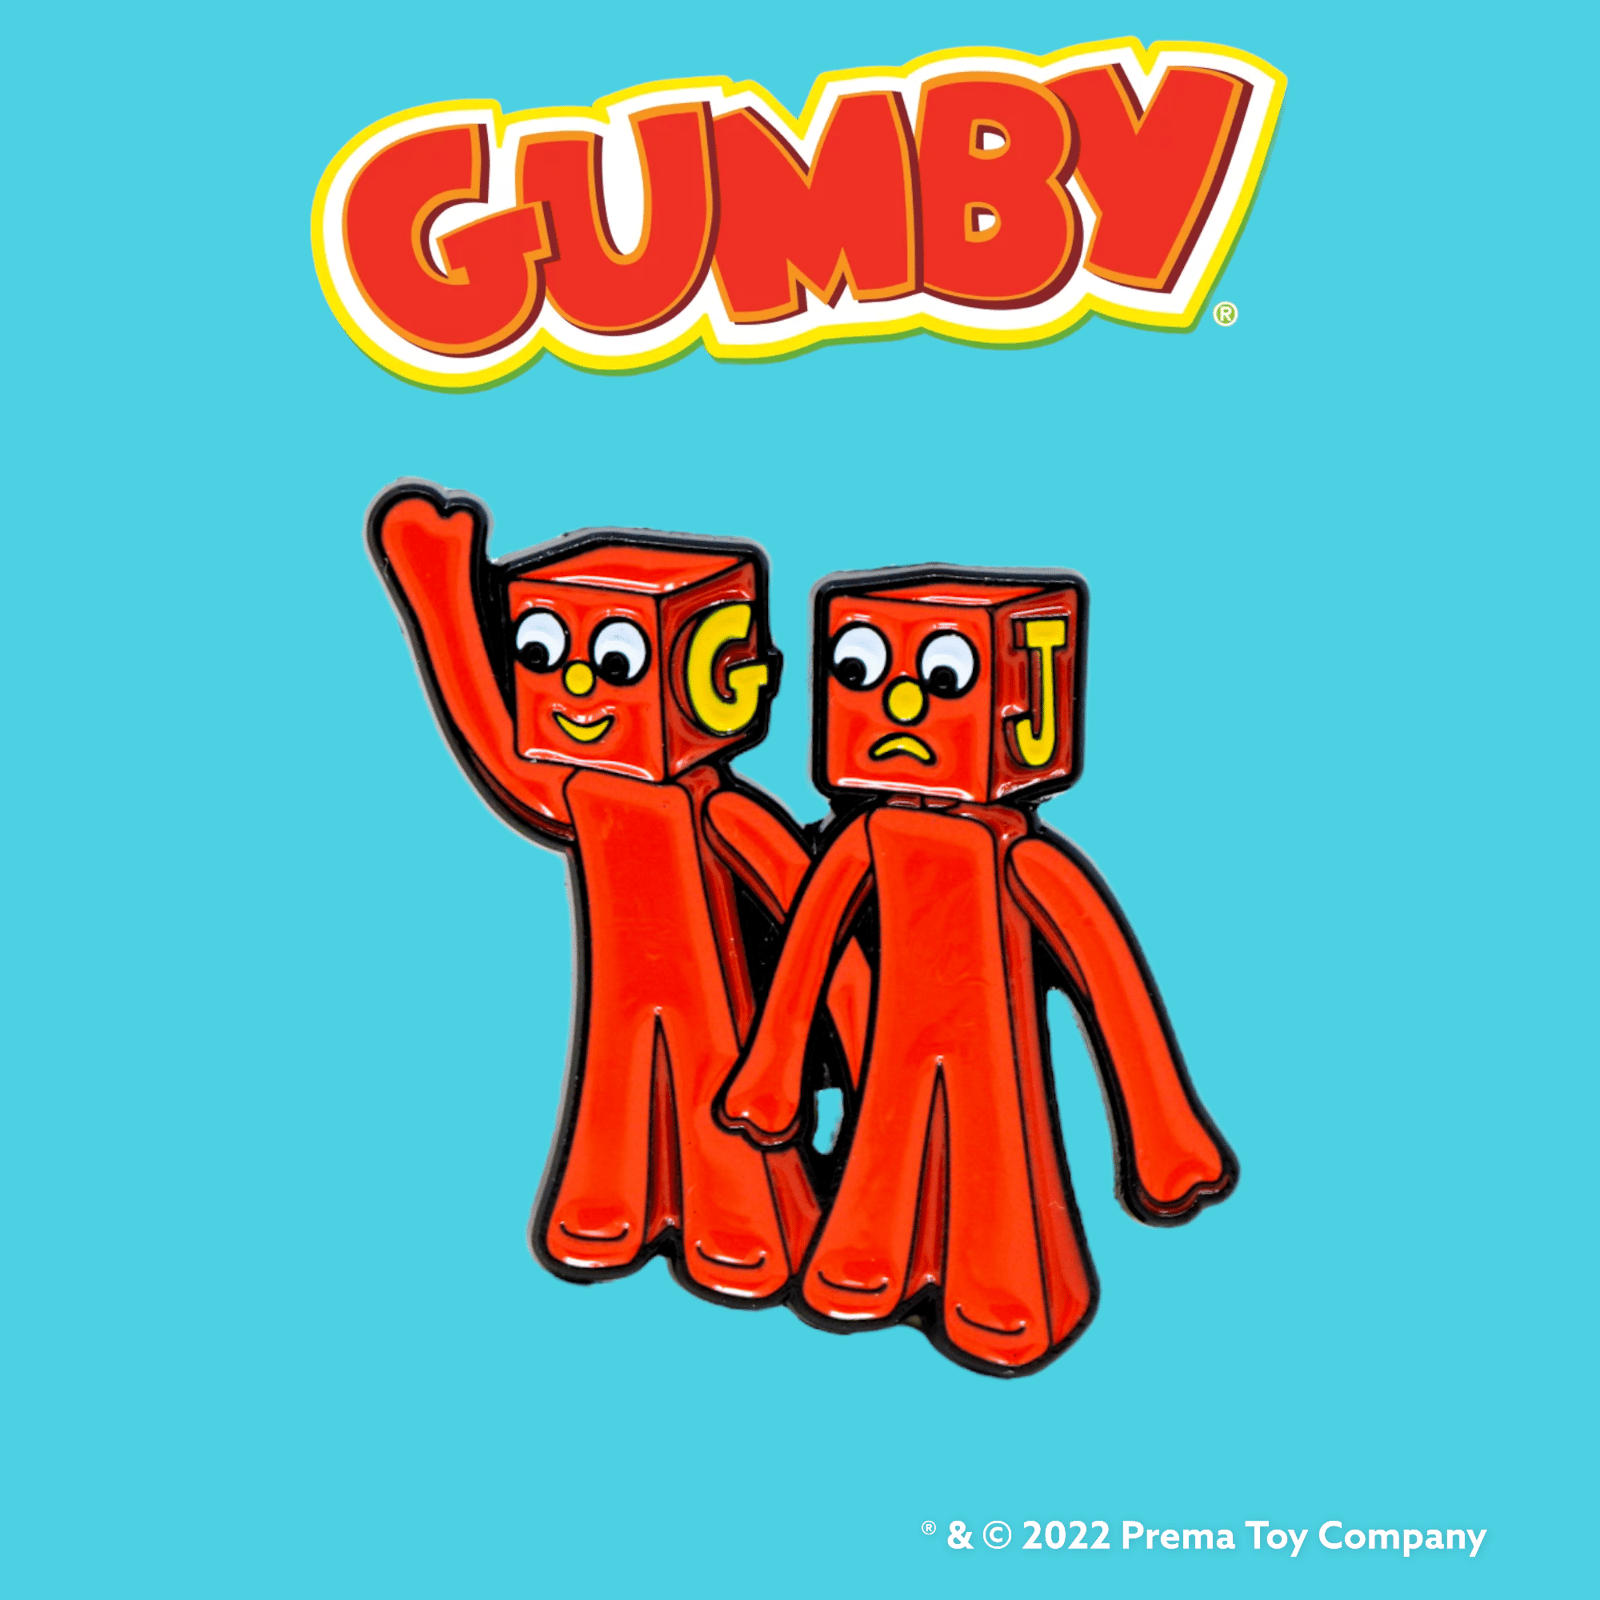 What's a Gumby? - YouTube